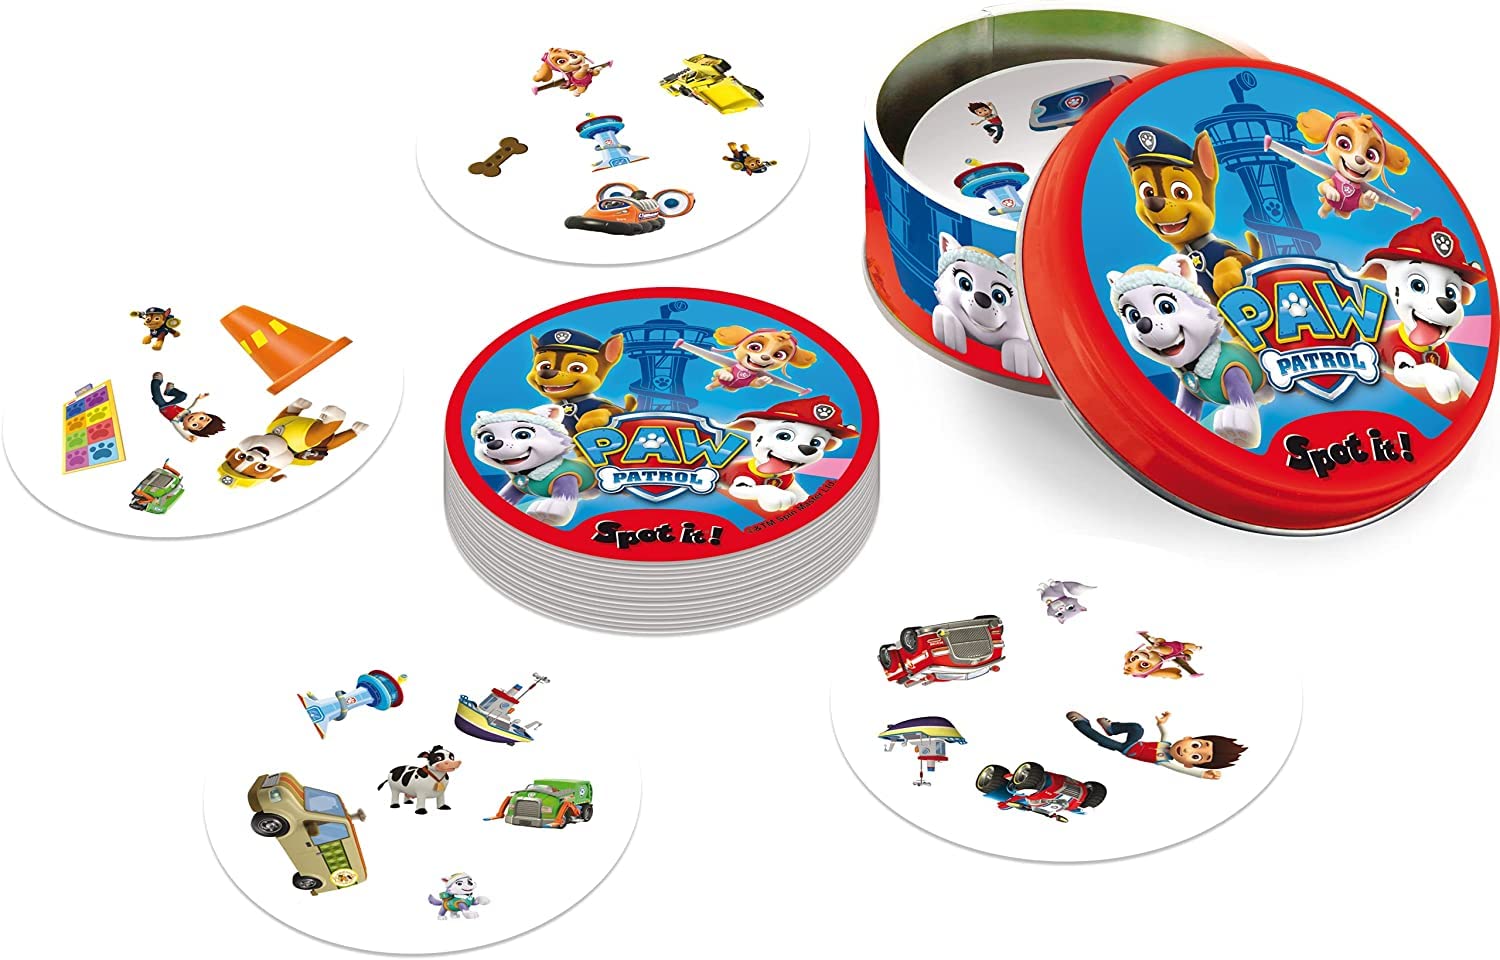 Zygomatic Spot It! Paw Patrol Card Game | Matching Game | Fun Kids Game for Family Game Night | Travel Game for Kids | Great Gift for Kids | Ages 4+ | 2-5 Players | Avg. Playtime 10 Mins | Made